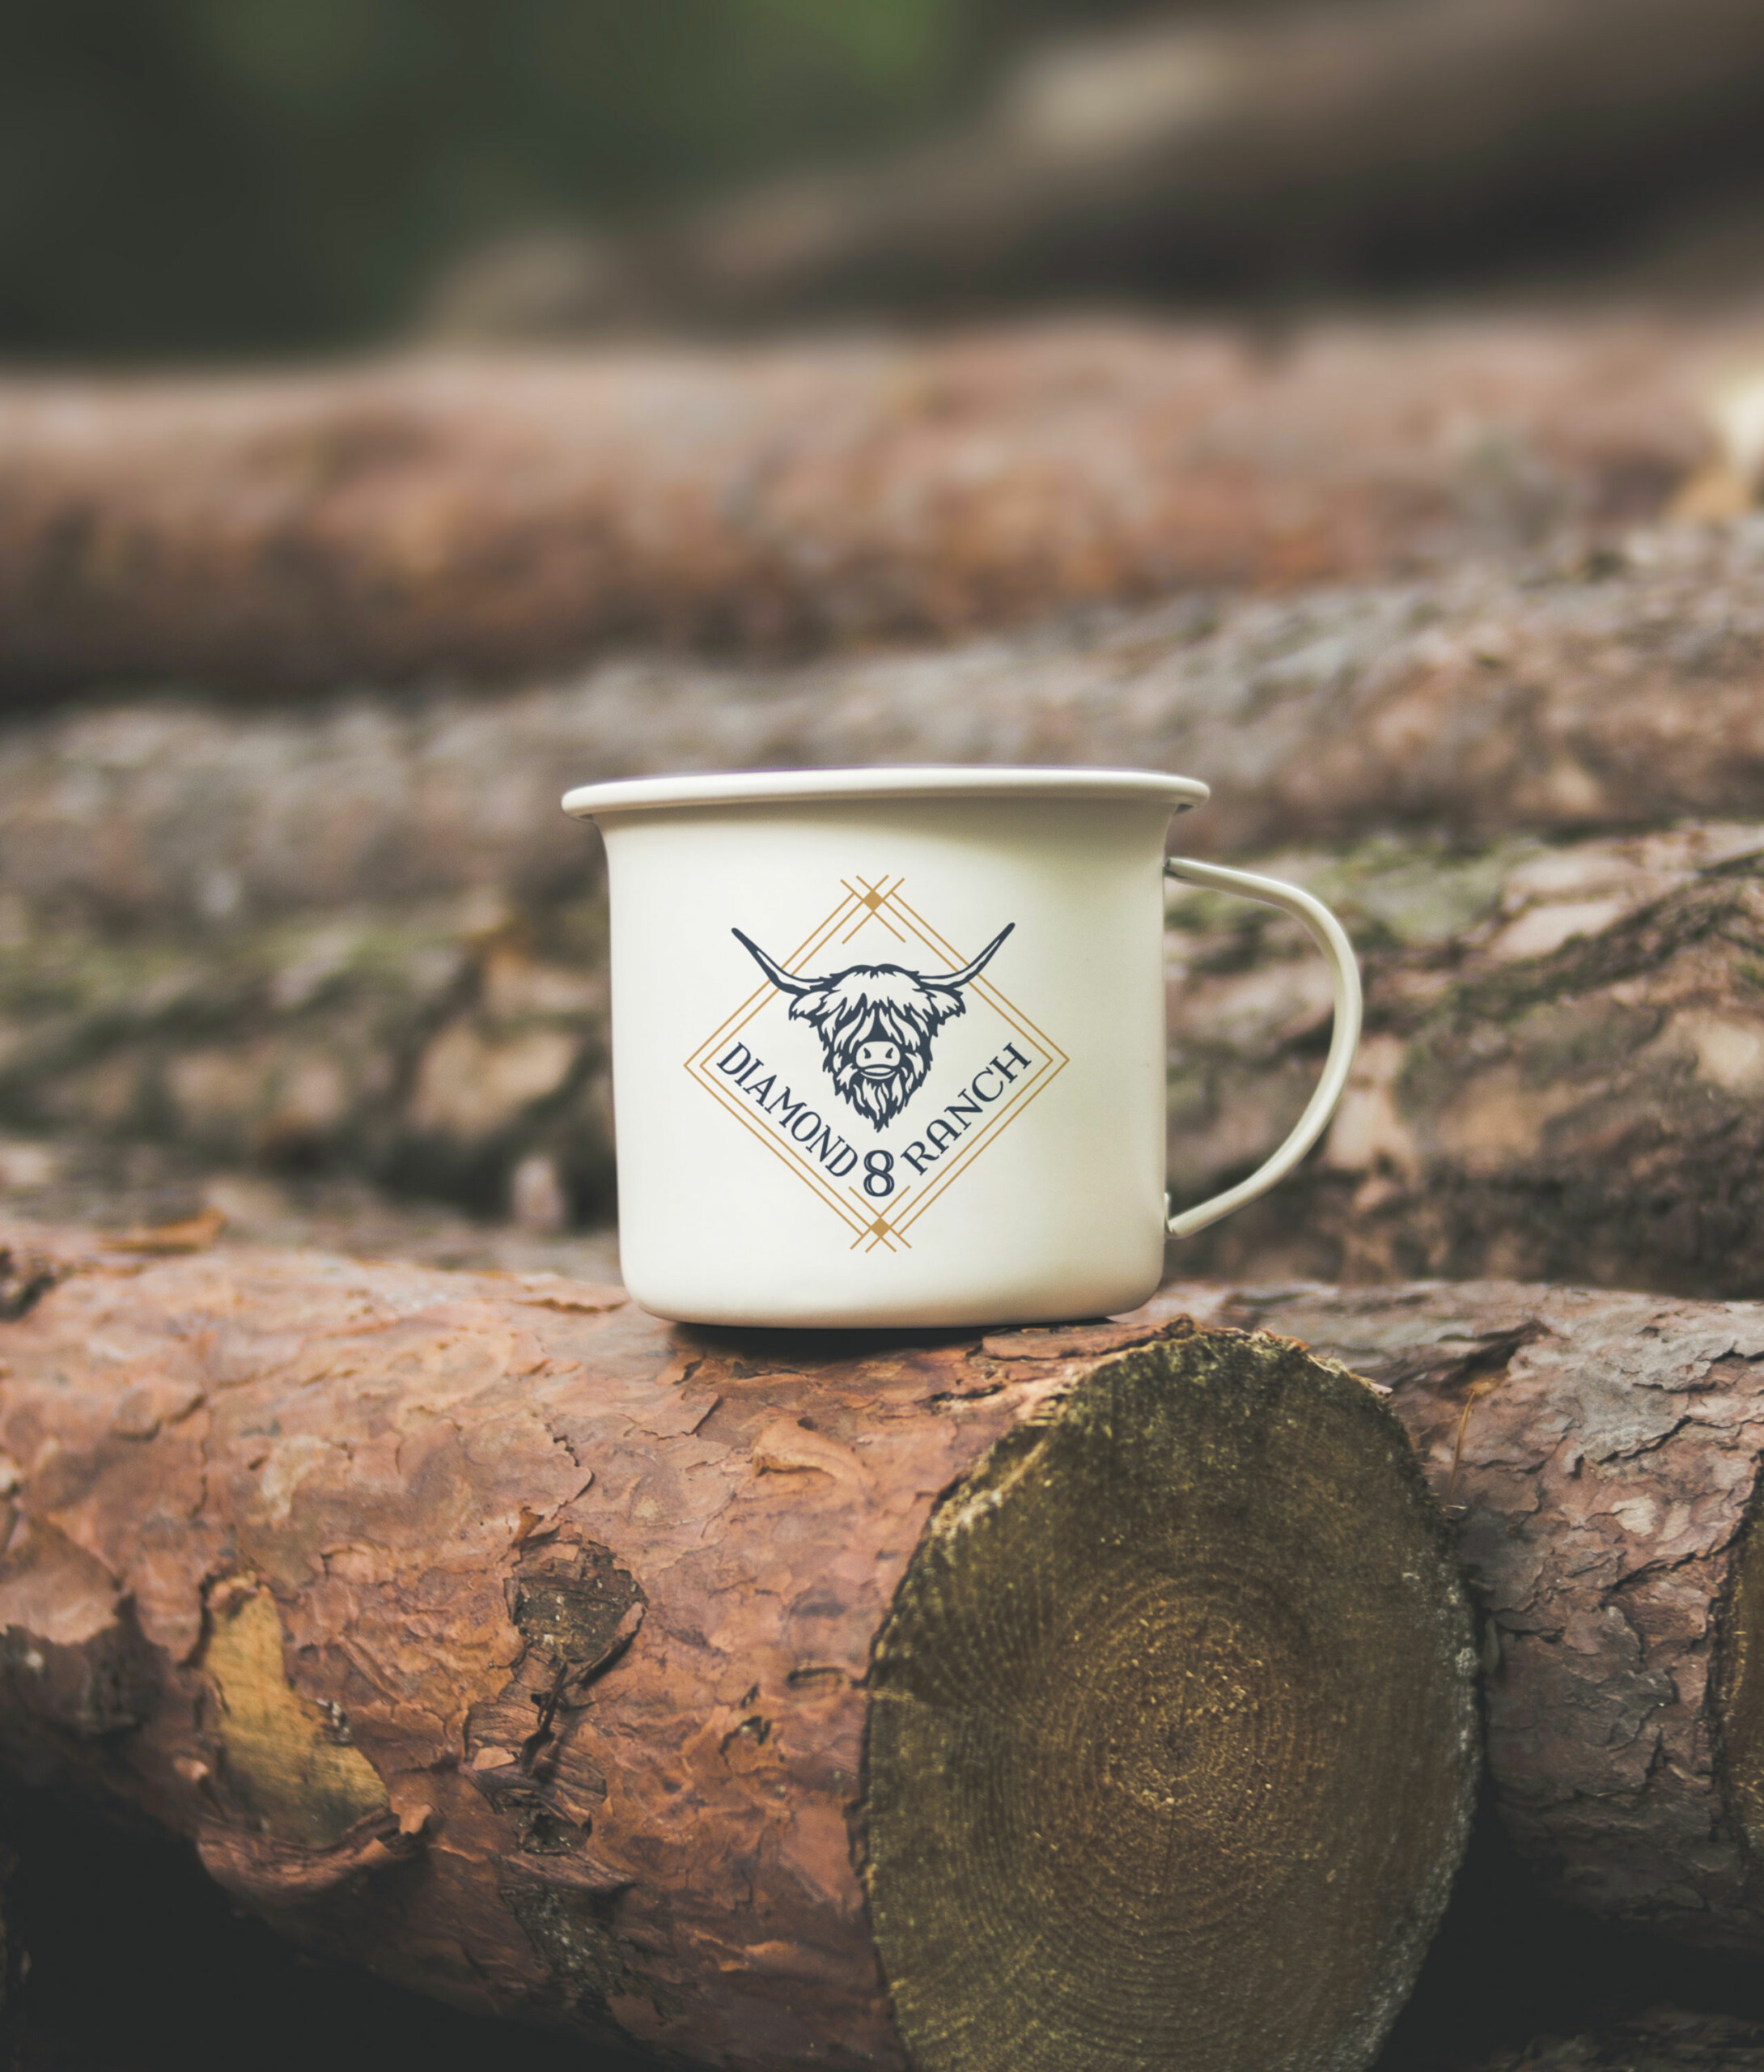 mug showing logo and branding for highland cow ranch in wyoming